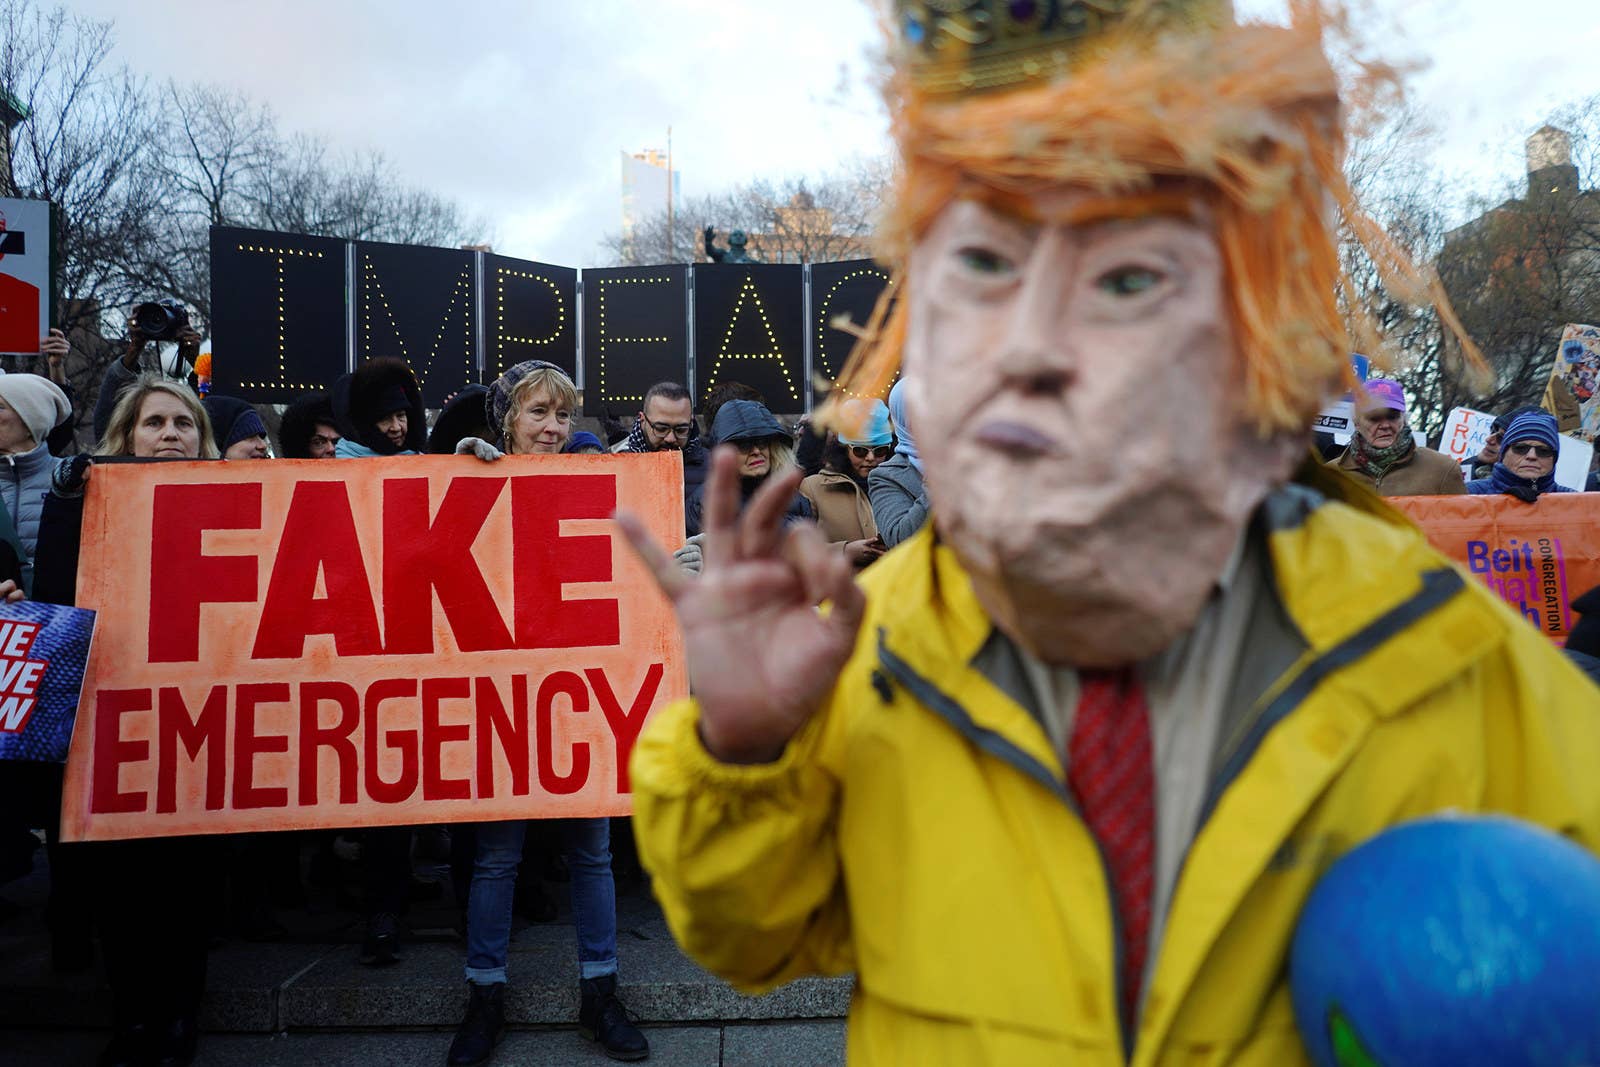 Protesters hold signs during a demonstration against President Donald Trump in New York City on Presidents Day, Feb. 18.